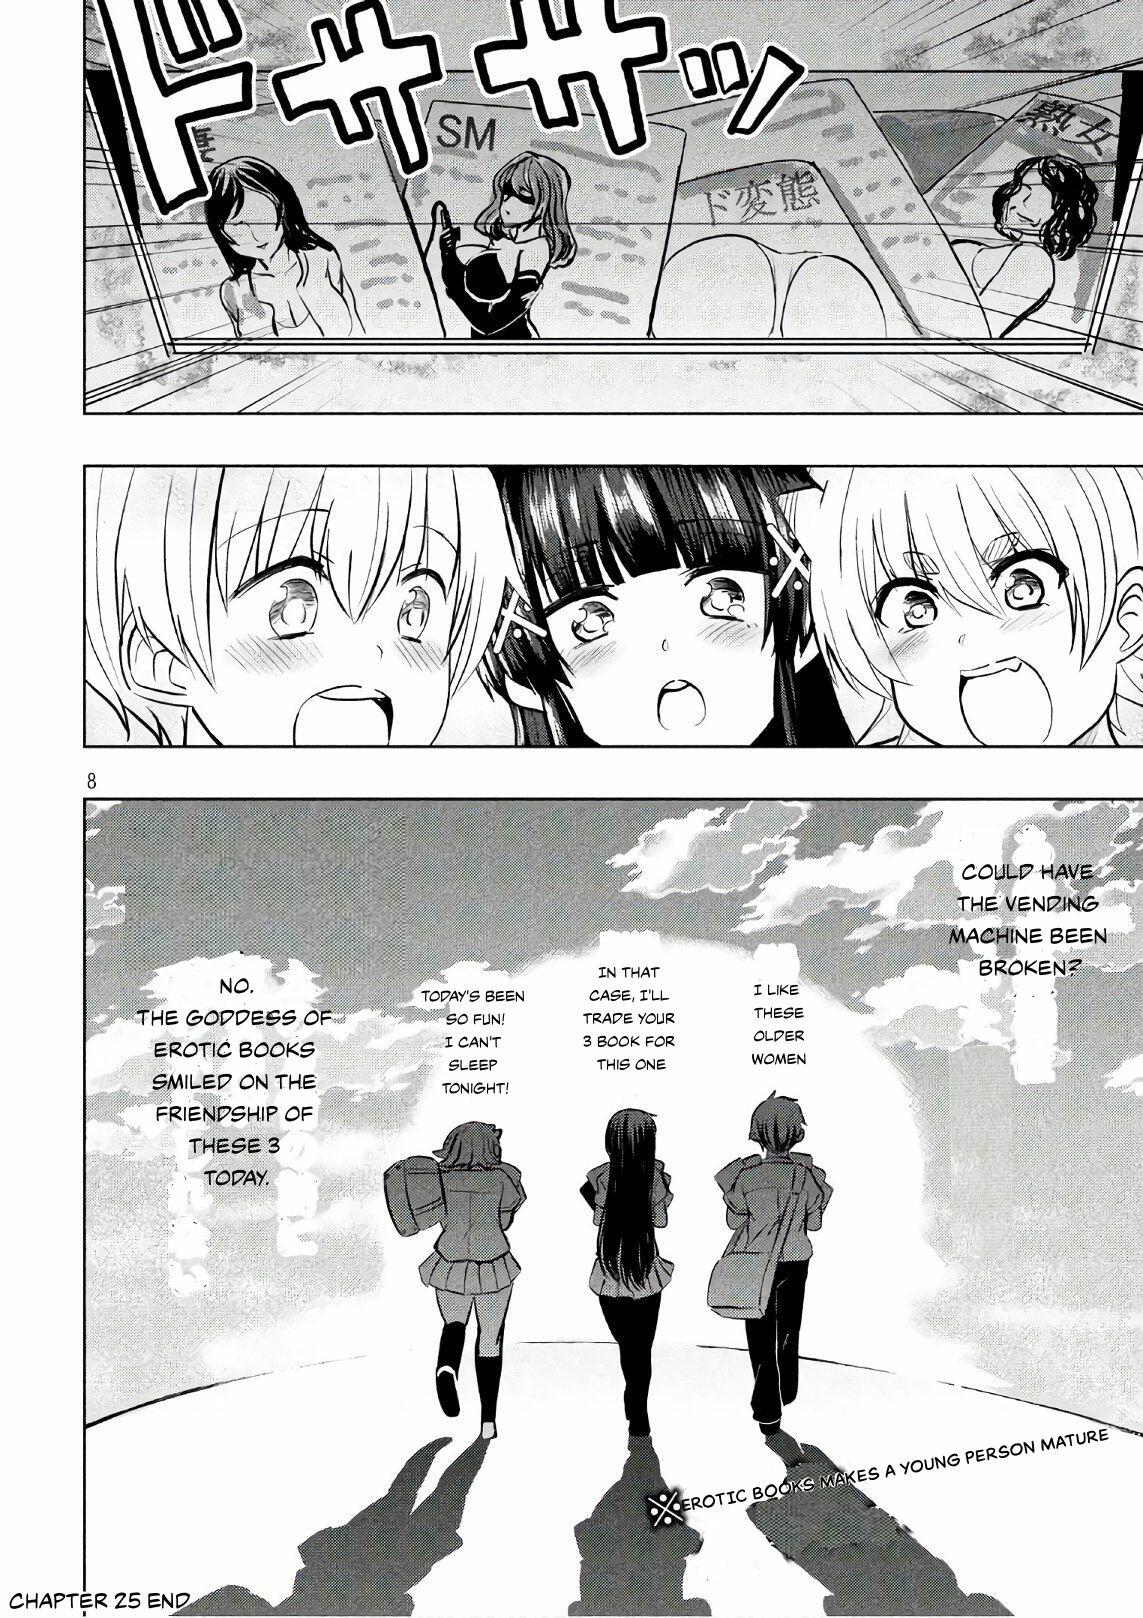 A Girl Who Is Very Well-Informed About Weird Knowledge, Takayukashiki Souko-San Chapter 25: Erotic Book page 8 - Mangakakalots.com